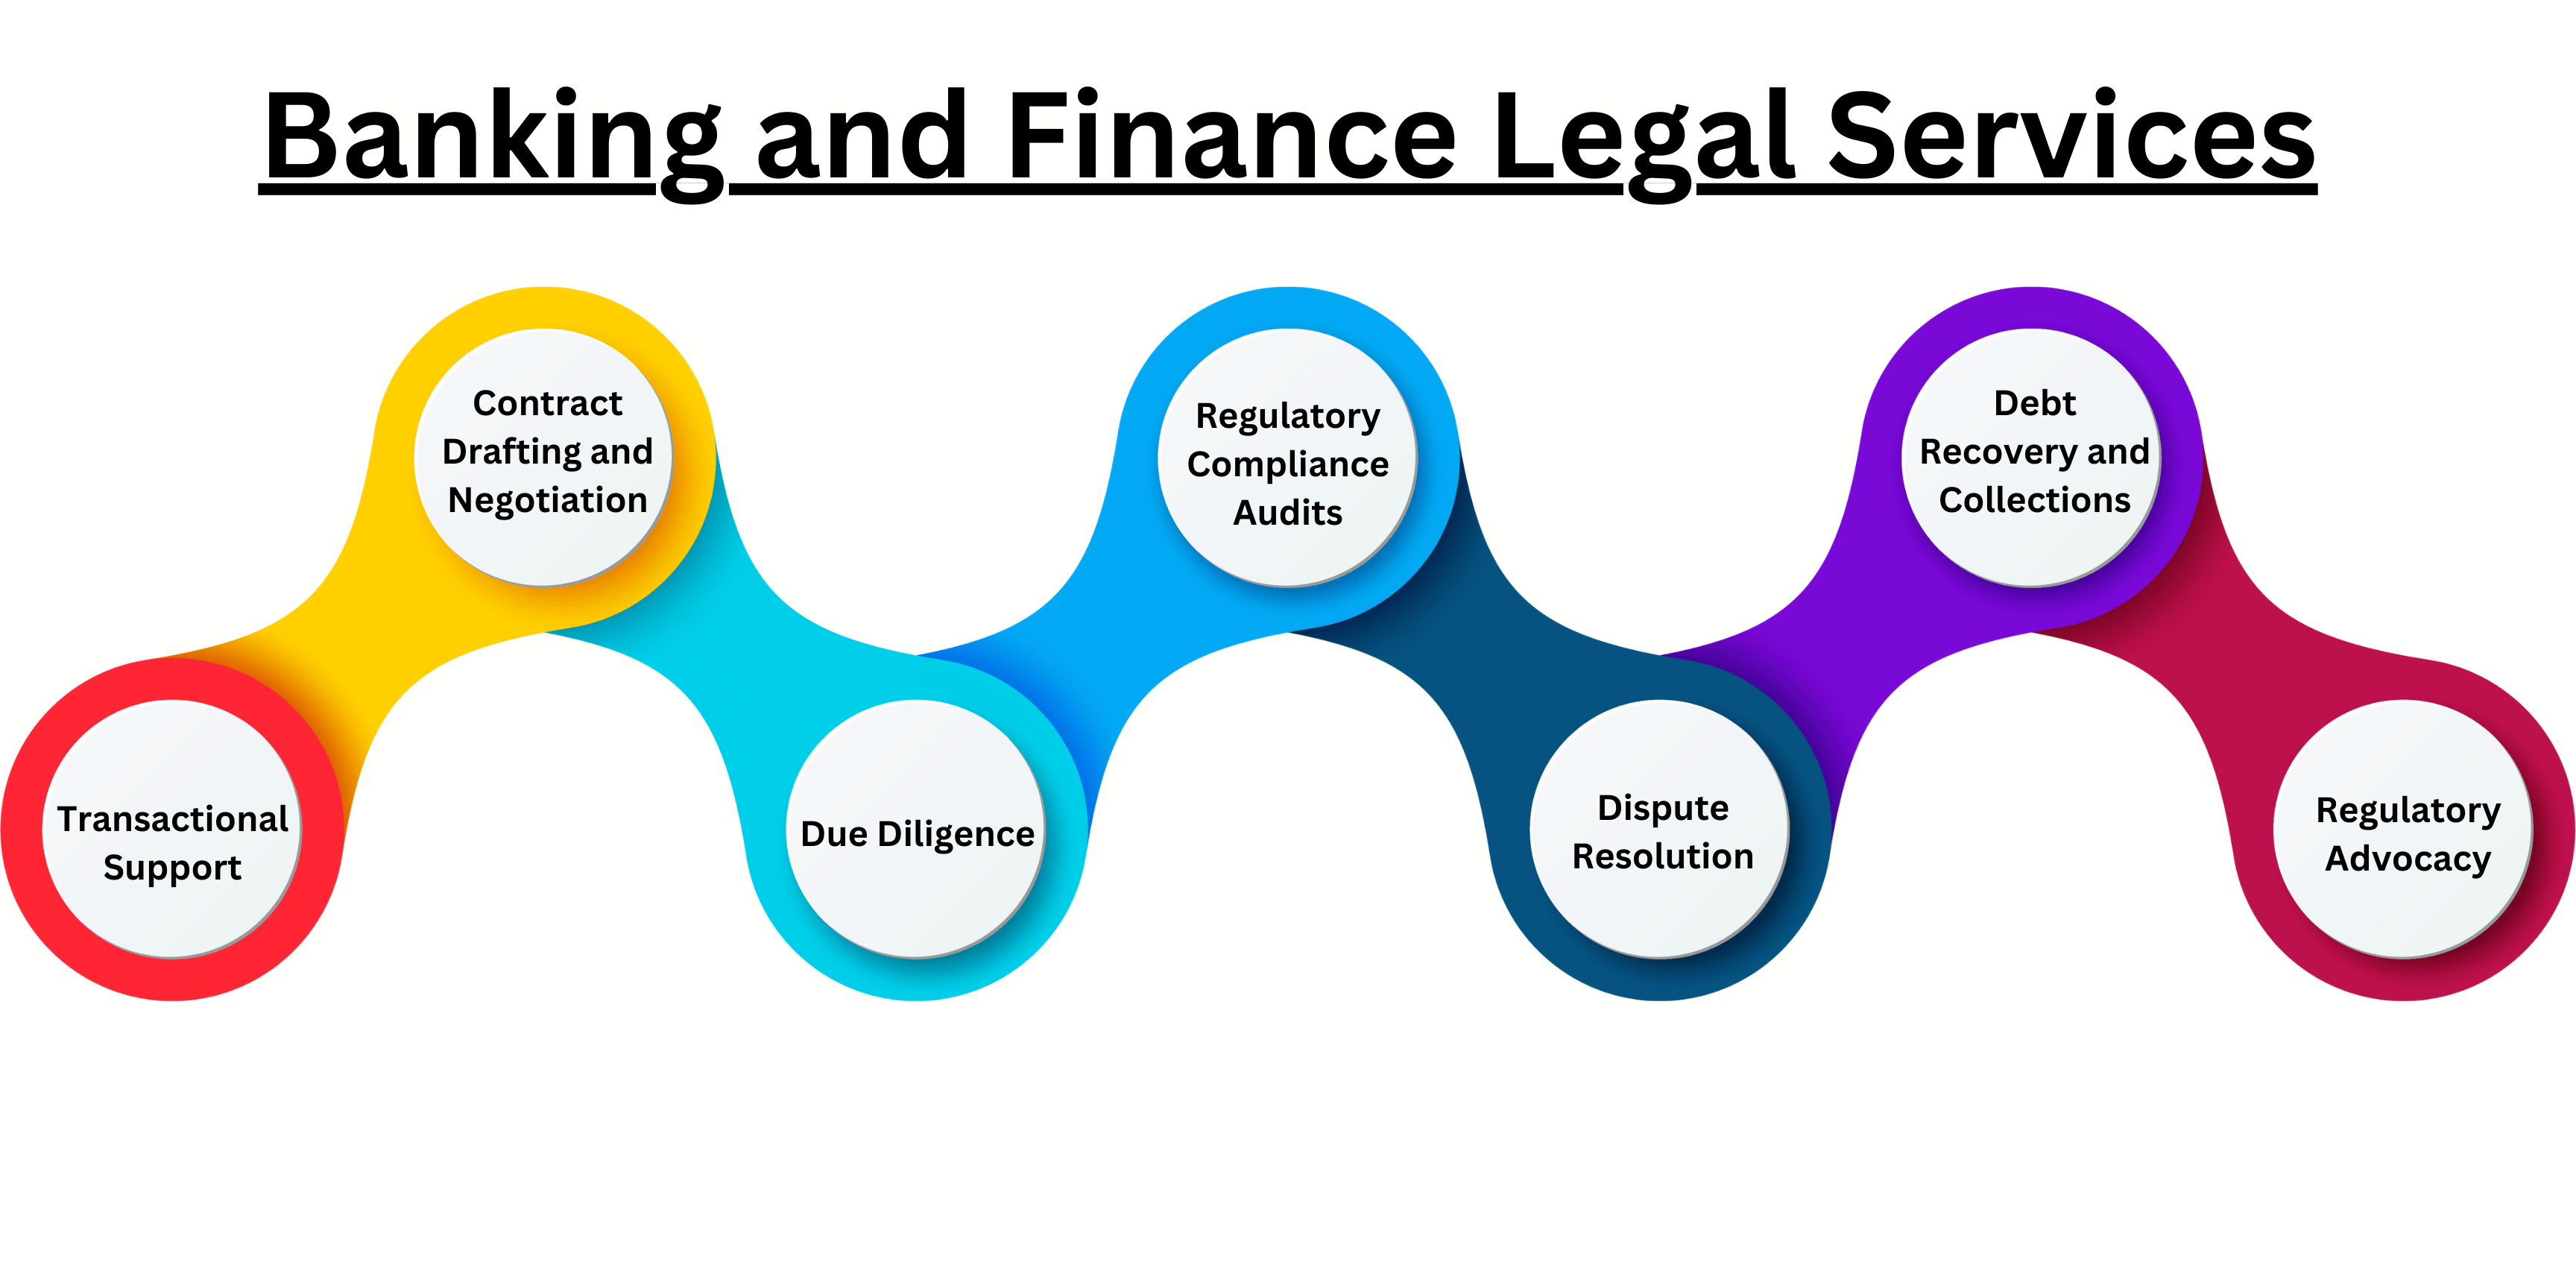 Banking and Finance Legal Services